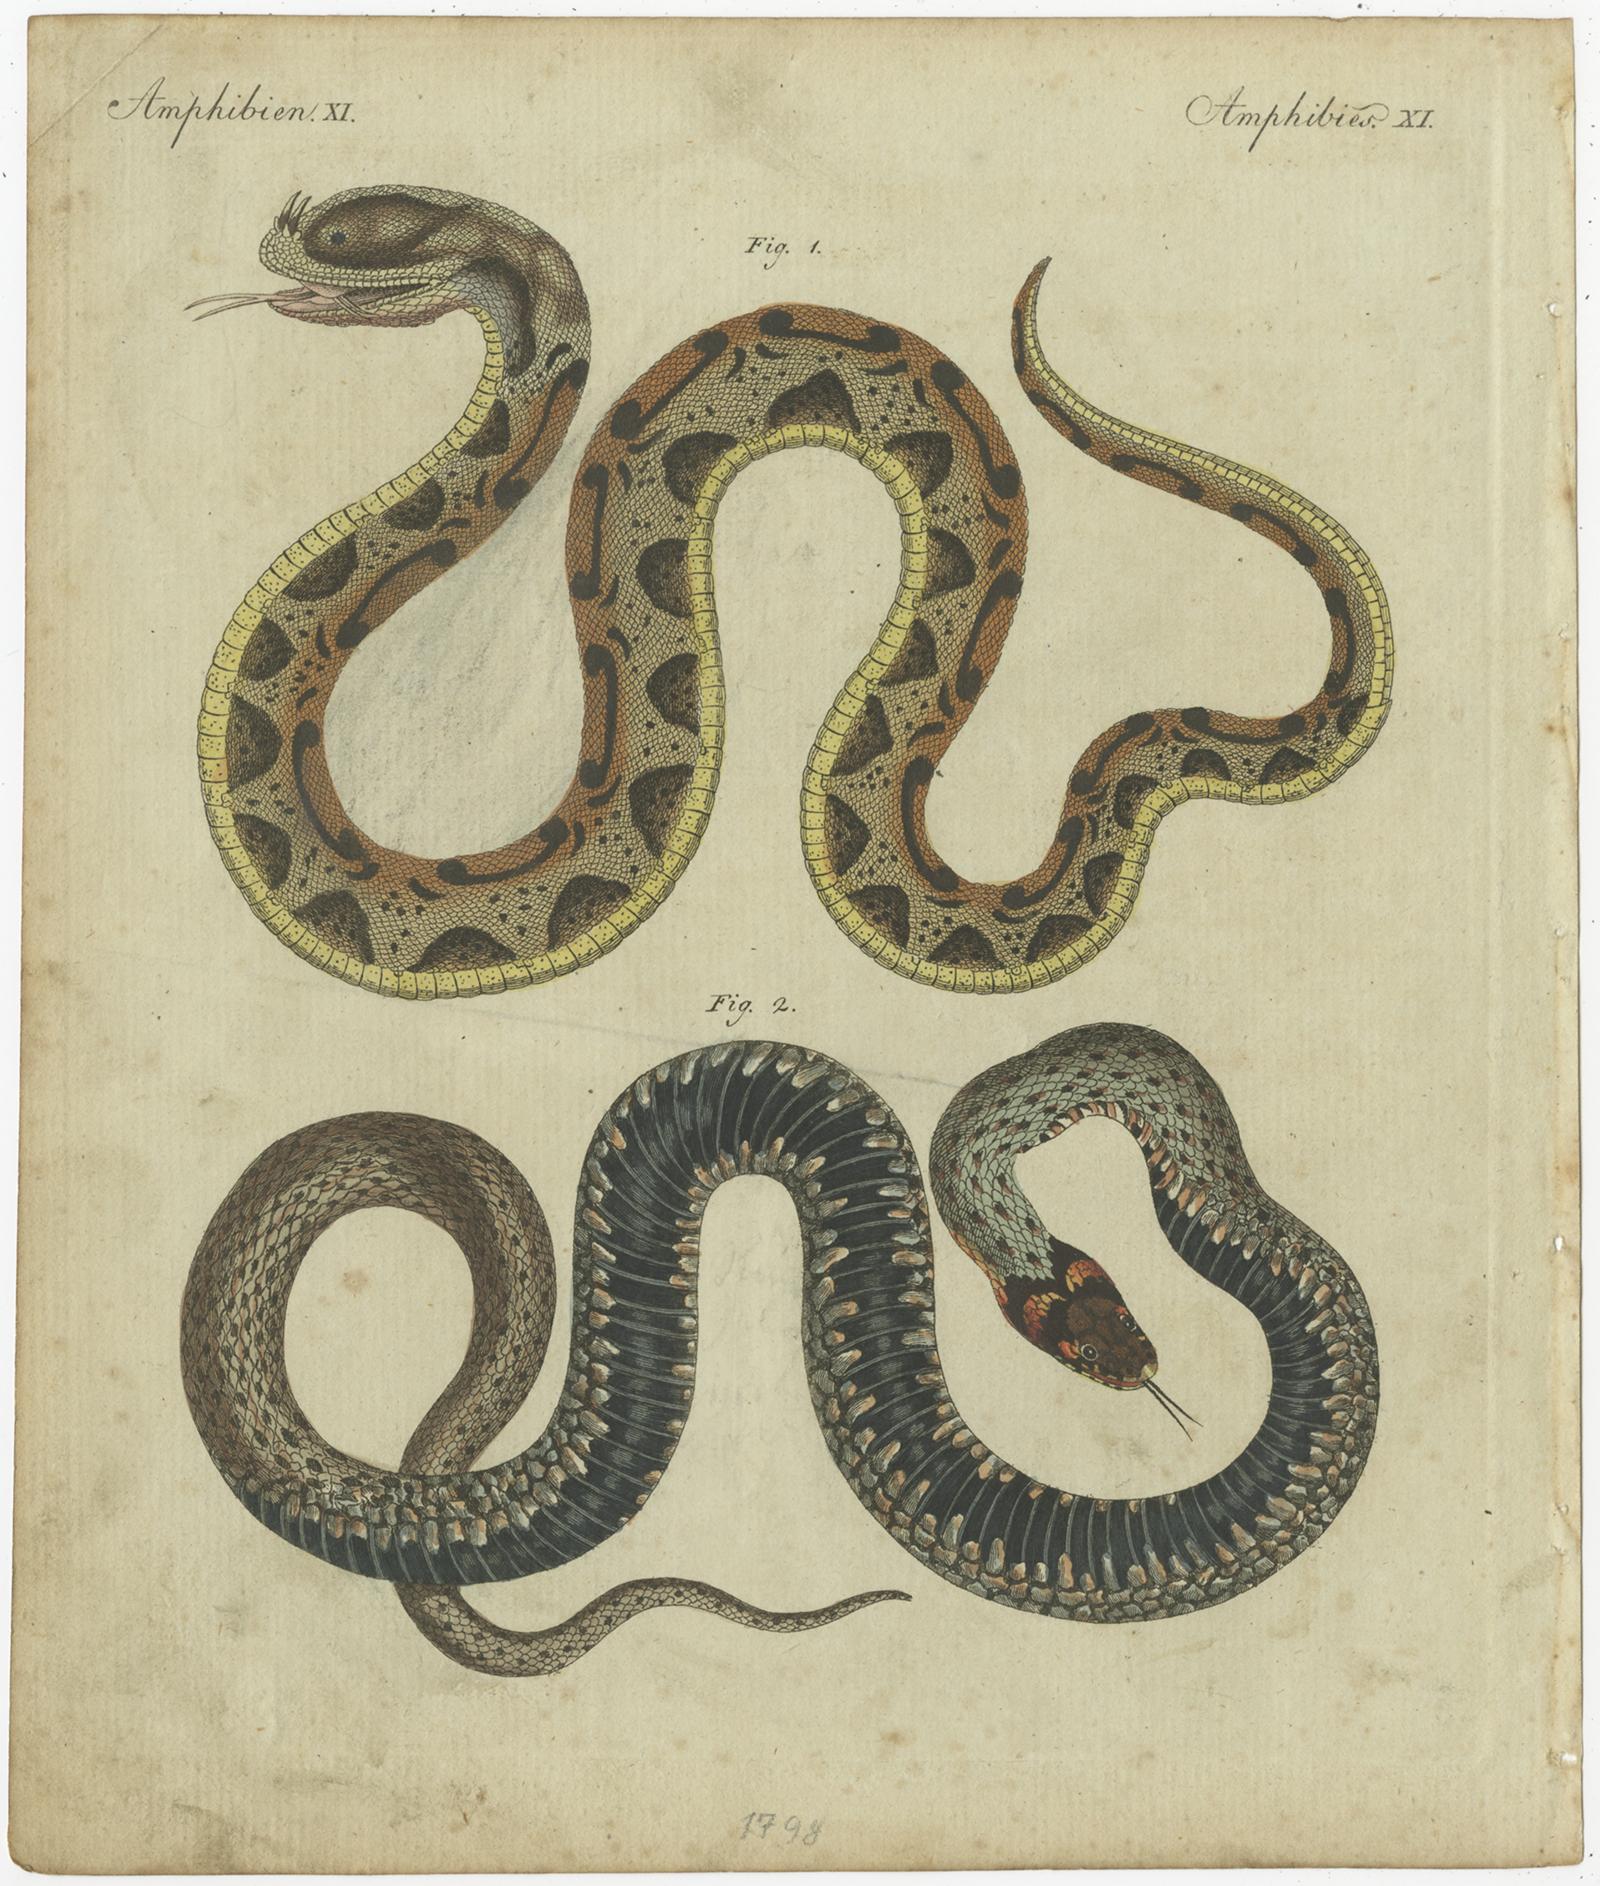 Set of two antique prints of various snakes including the boa constrictor, emerald tree boa, rhinoceros viper and carpet python. These prints originate from 'Bilderbuch fur Kinder' by F.J. Bertuch. Published, circa 1800.